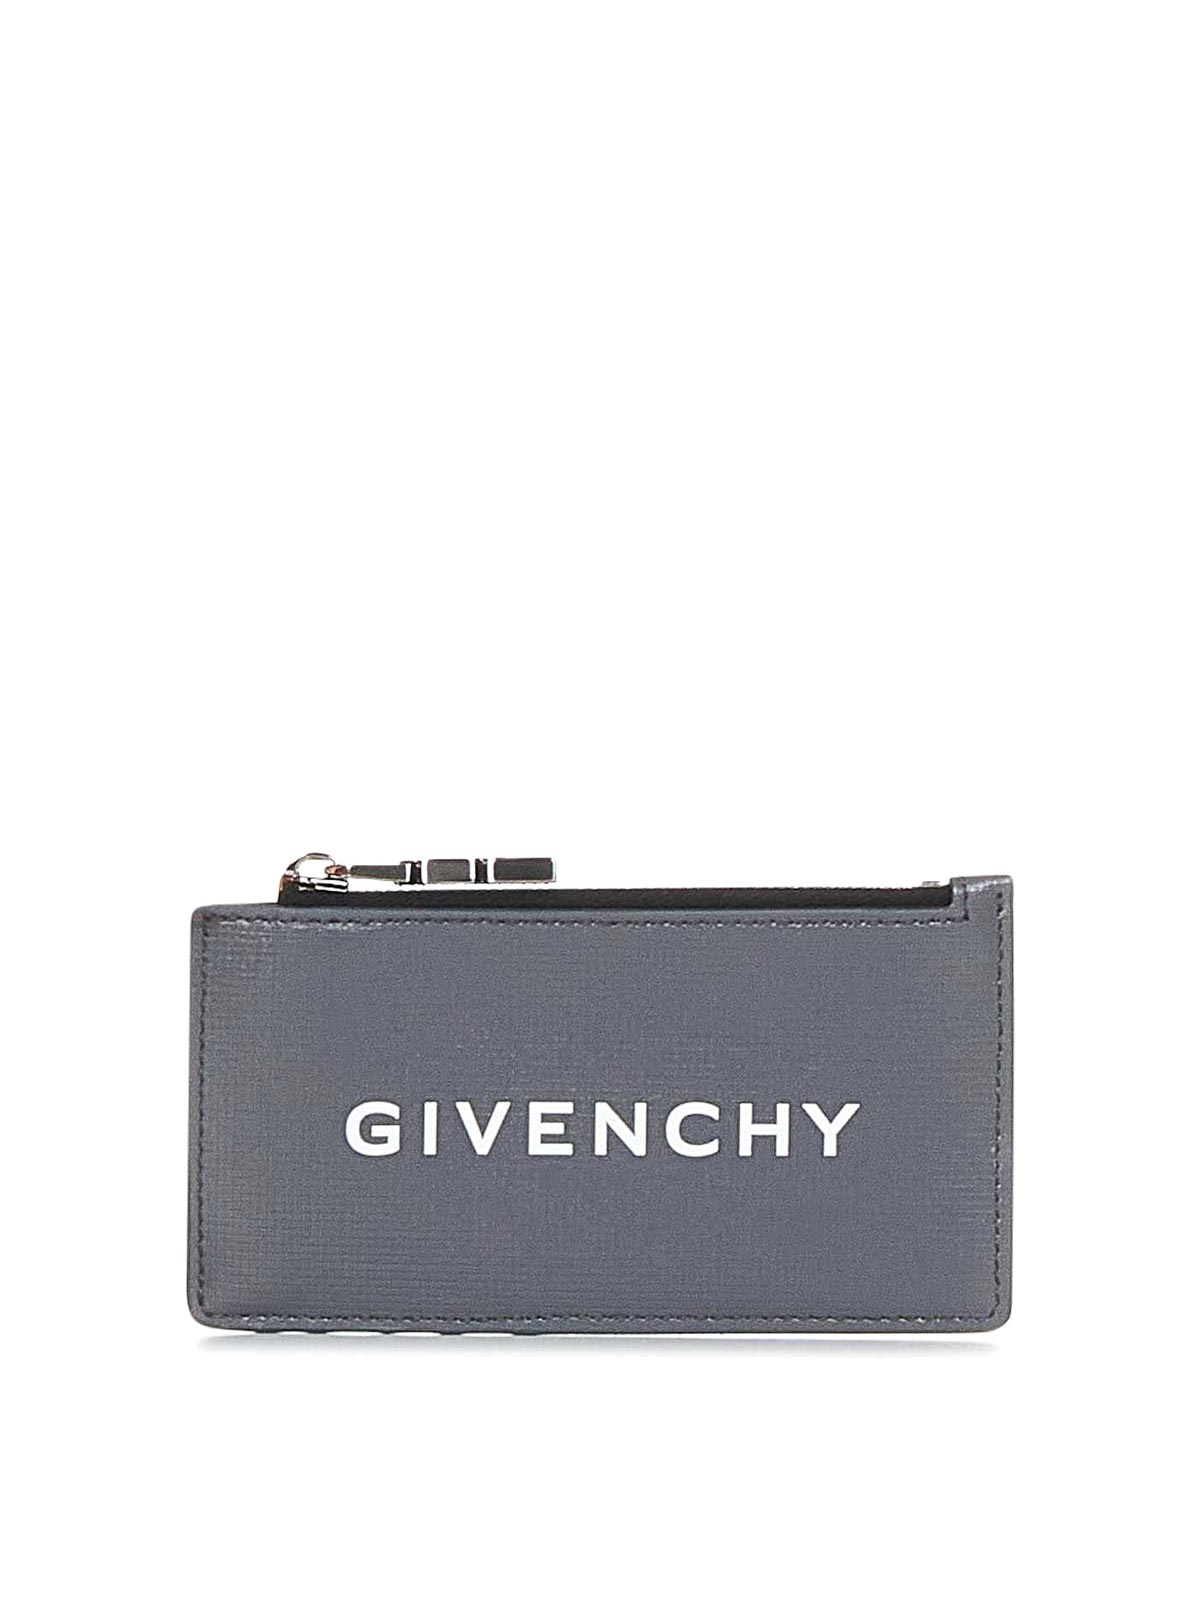 Givenchy Grey Embossed Calfskin Card Case